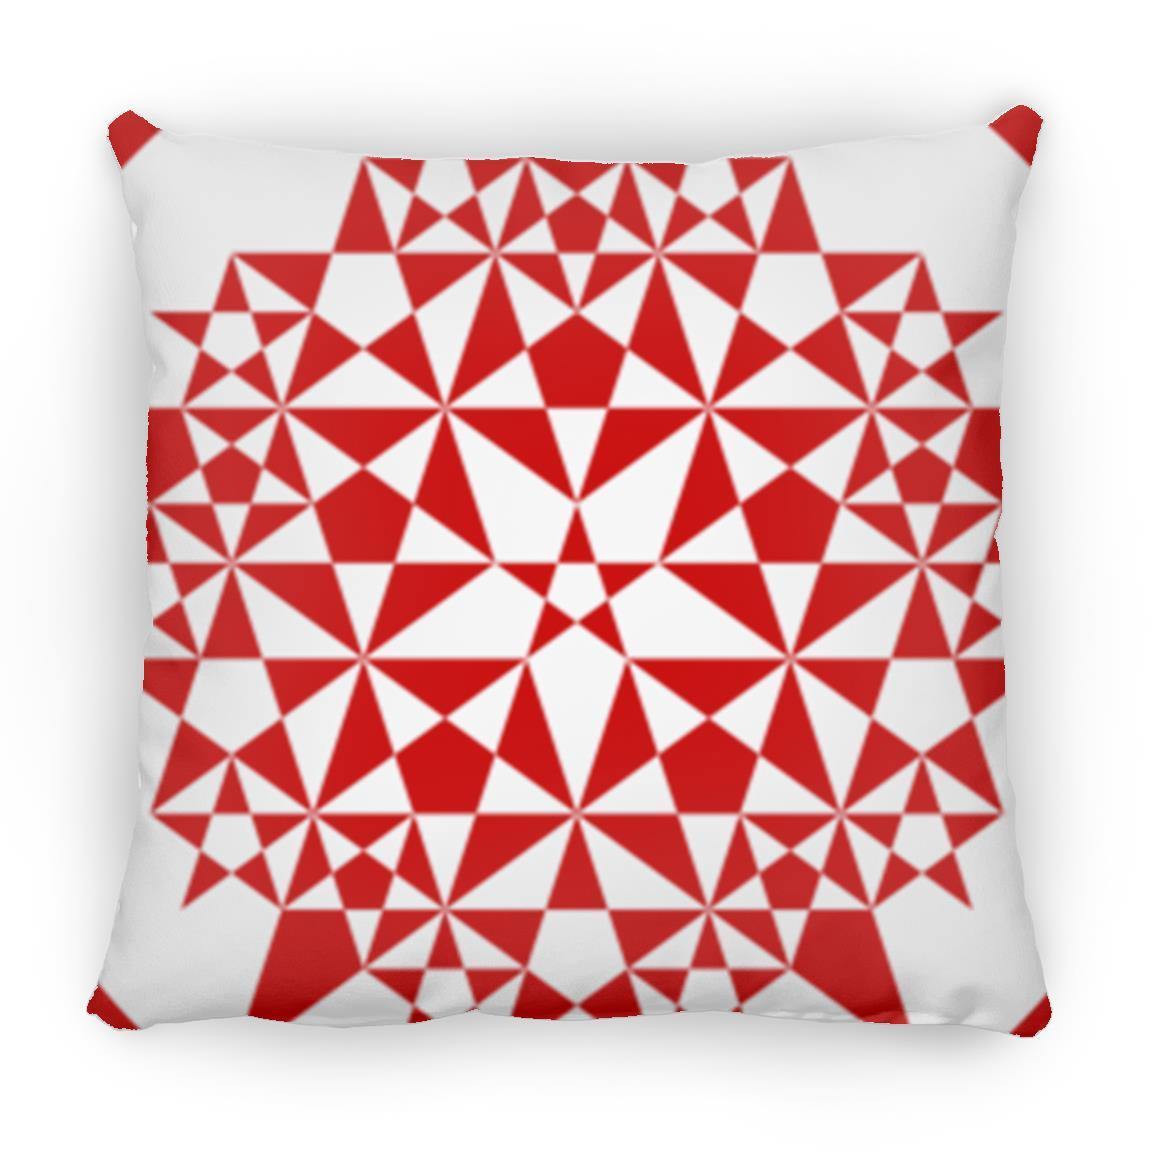 Crop Circle Pillow - Martinsell Hill - Shapes of Wisdom